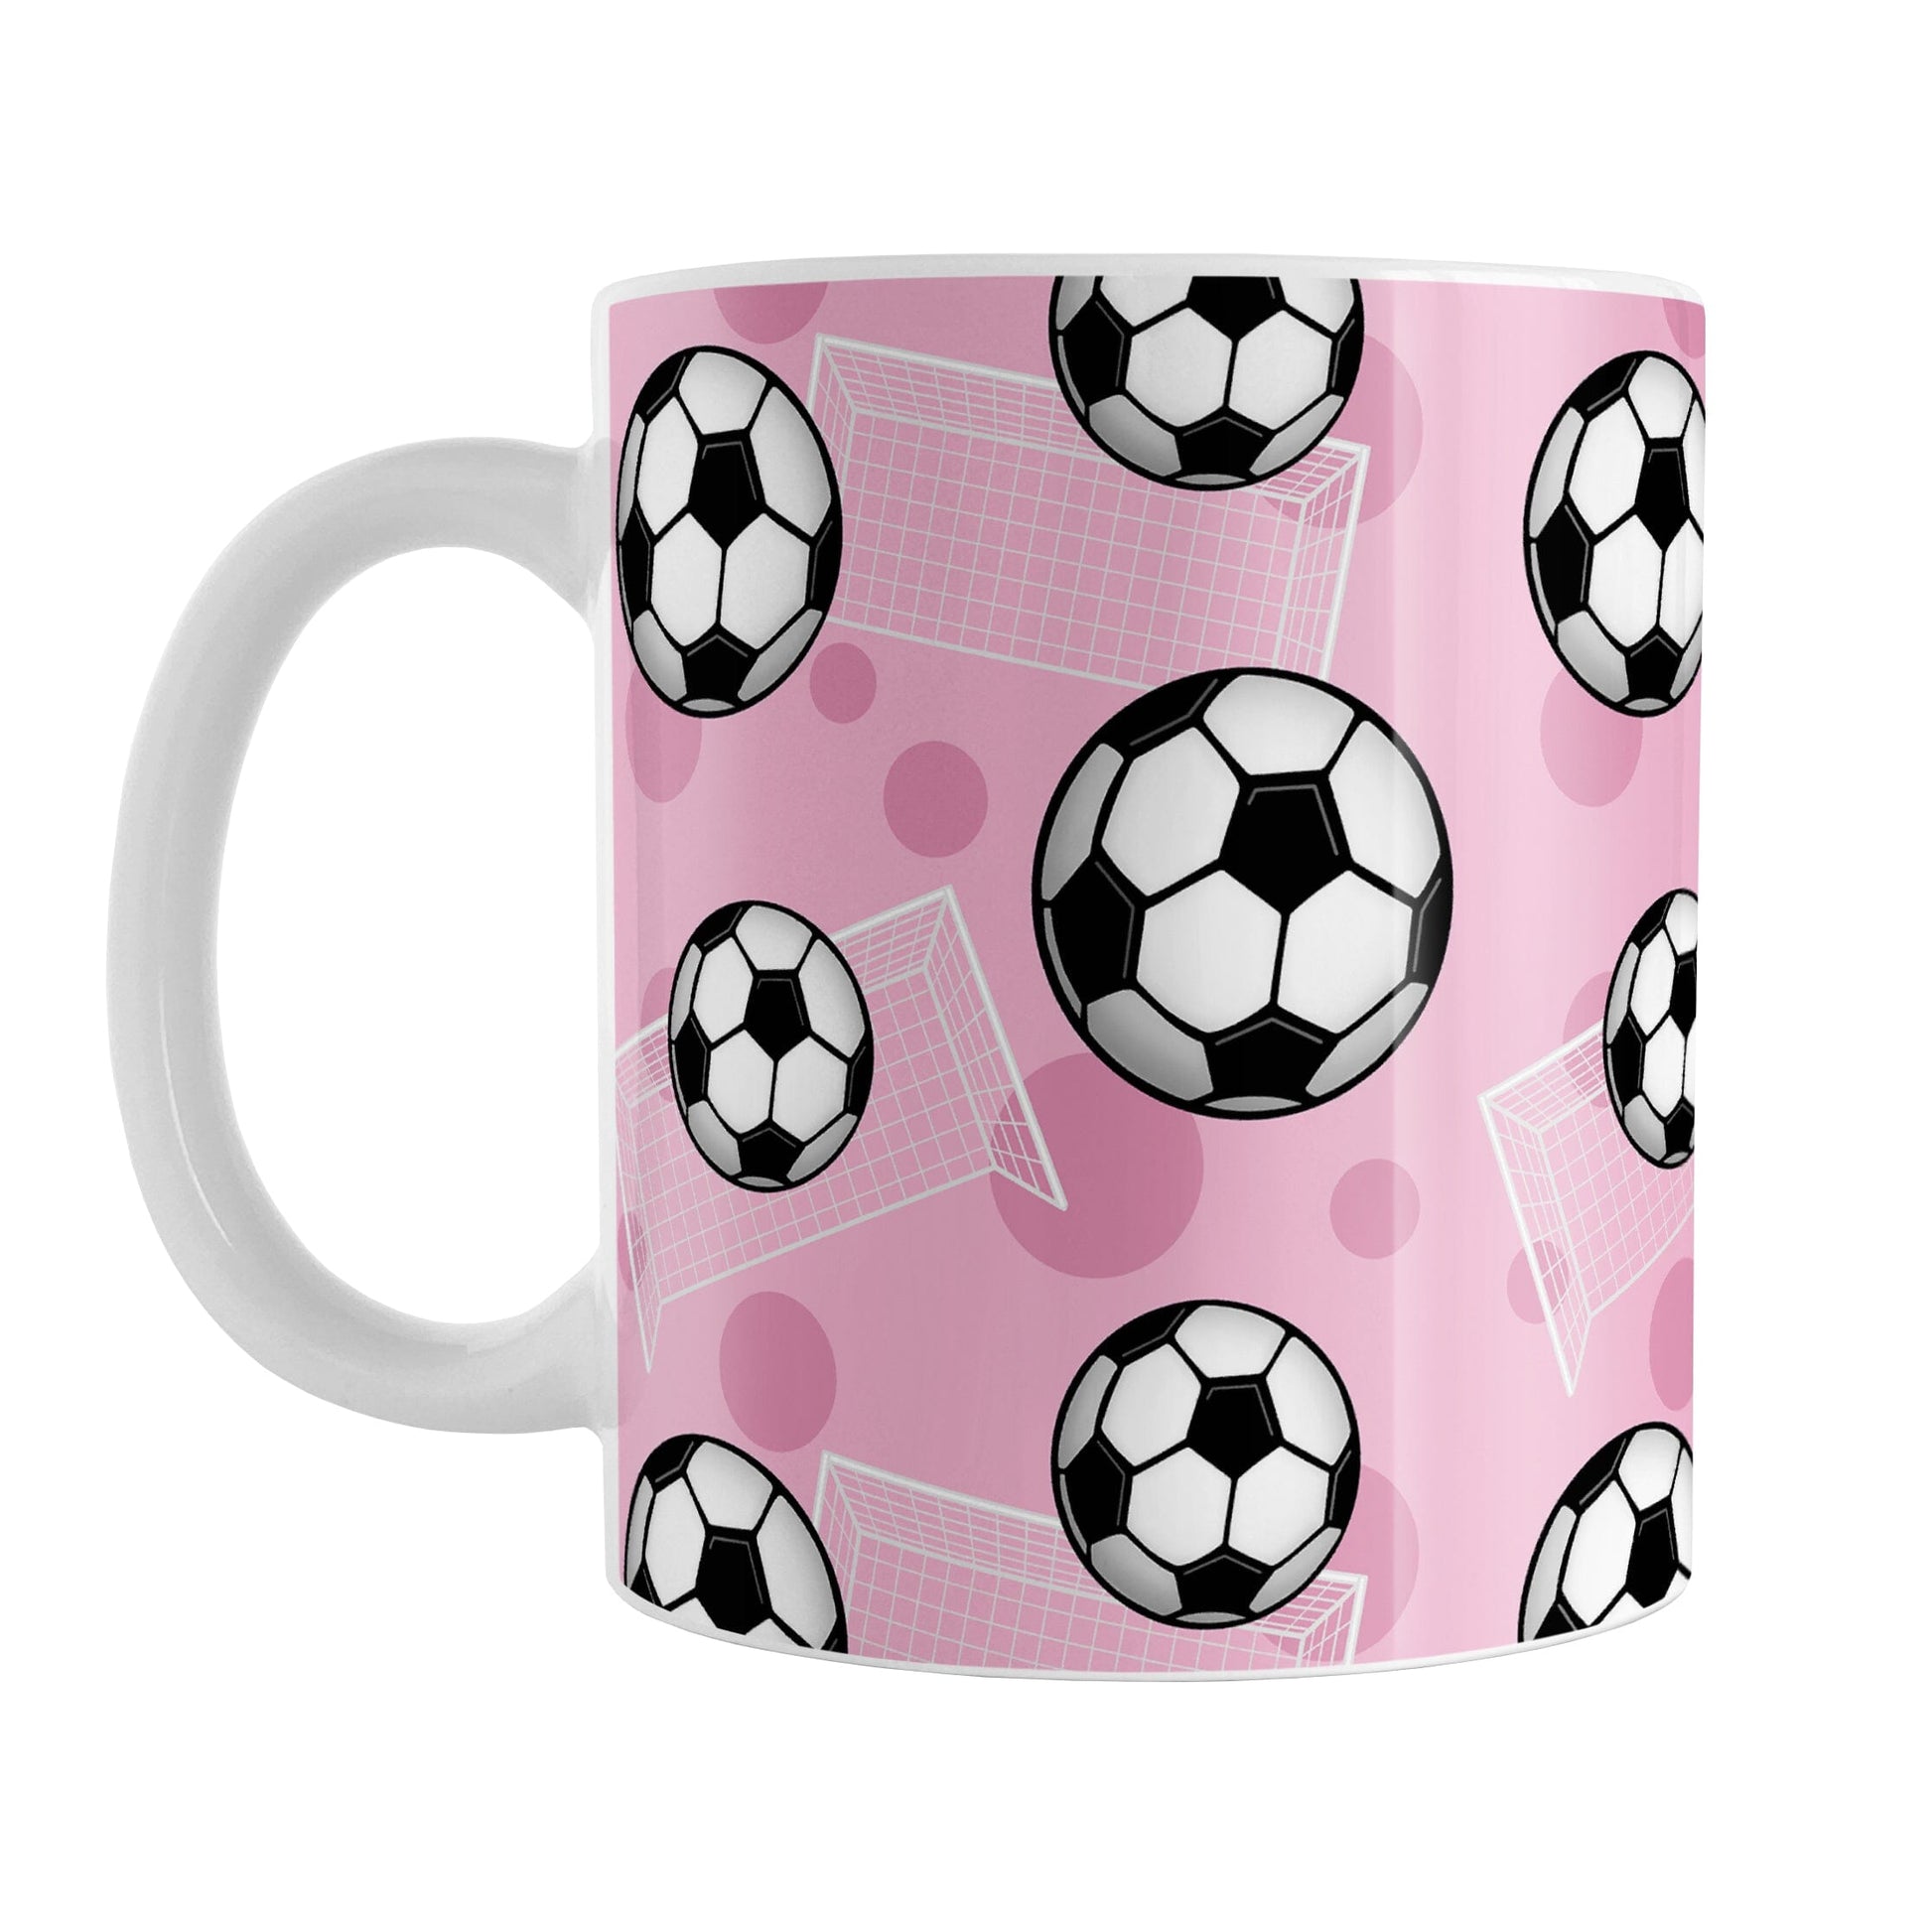 Soccer Ball and Goal Pattern Pink Mug (11oz) at Amy's Coffee Mugs. A ceramic coffee mug designed with a pattern of soccer balls and white soccer goals over a pink background with pink circles.